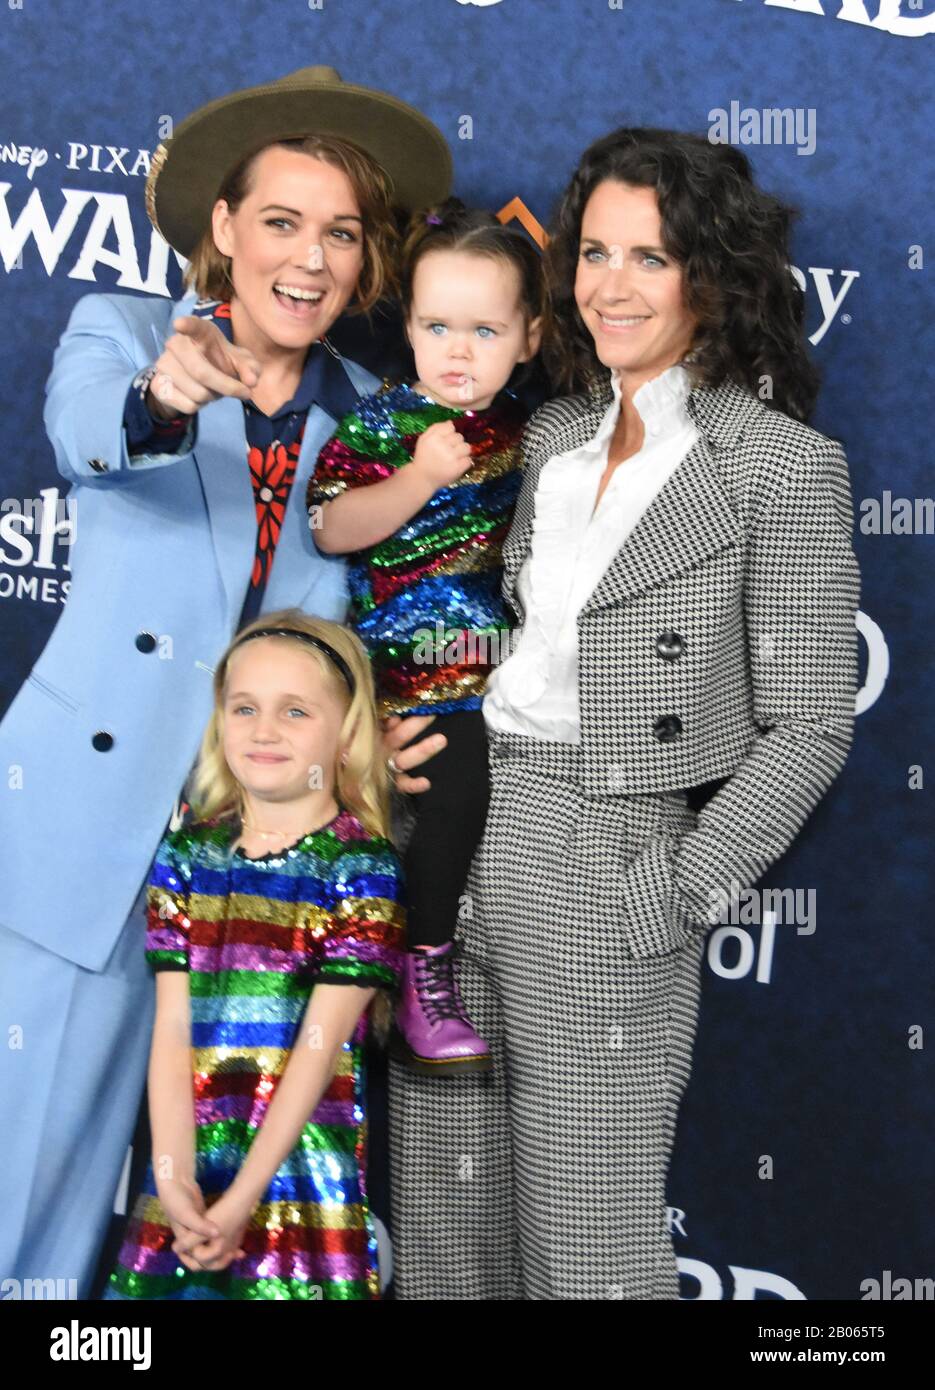 Hollywood, California, USA 18th February 2020 Singer/songwriter Brandi Carlile, daughters Evangeline Ruth Carlile and Elijah Carlile and Catherine Shepherd attend Disney Pixar 'Onward' World Premiere on February 18, 2020 at the El Capitan Theatre in Hollywood, California, USA. Photo by Barry King/Alamy Live News Stock Photo